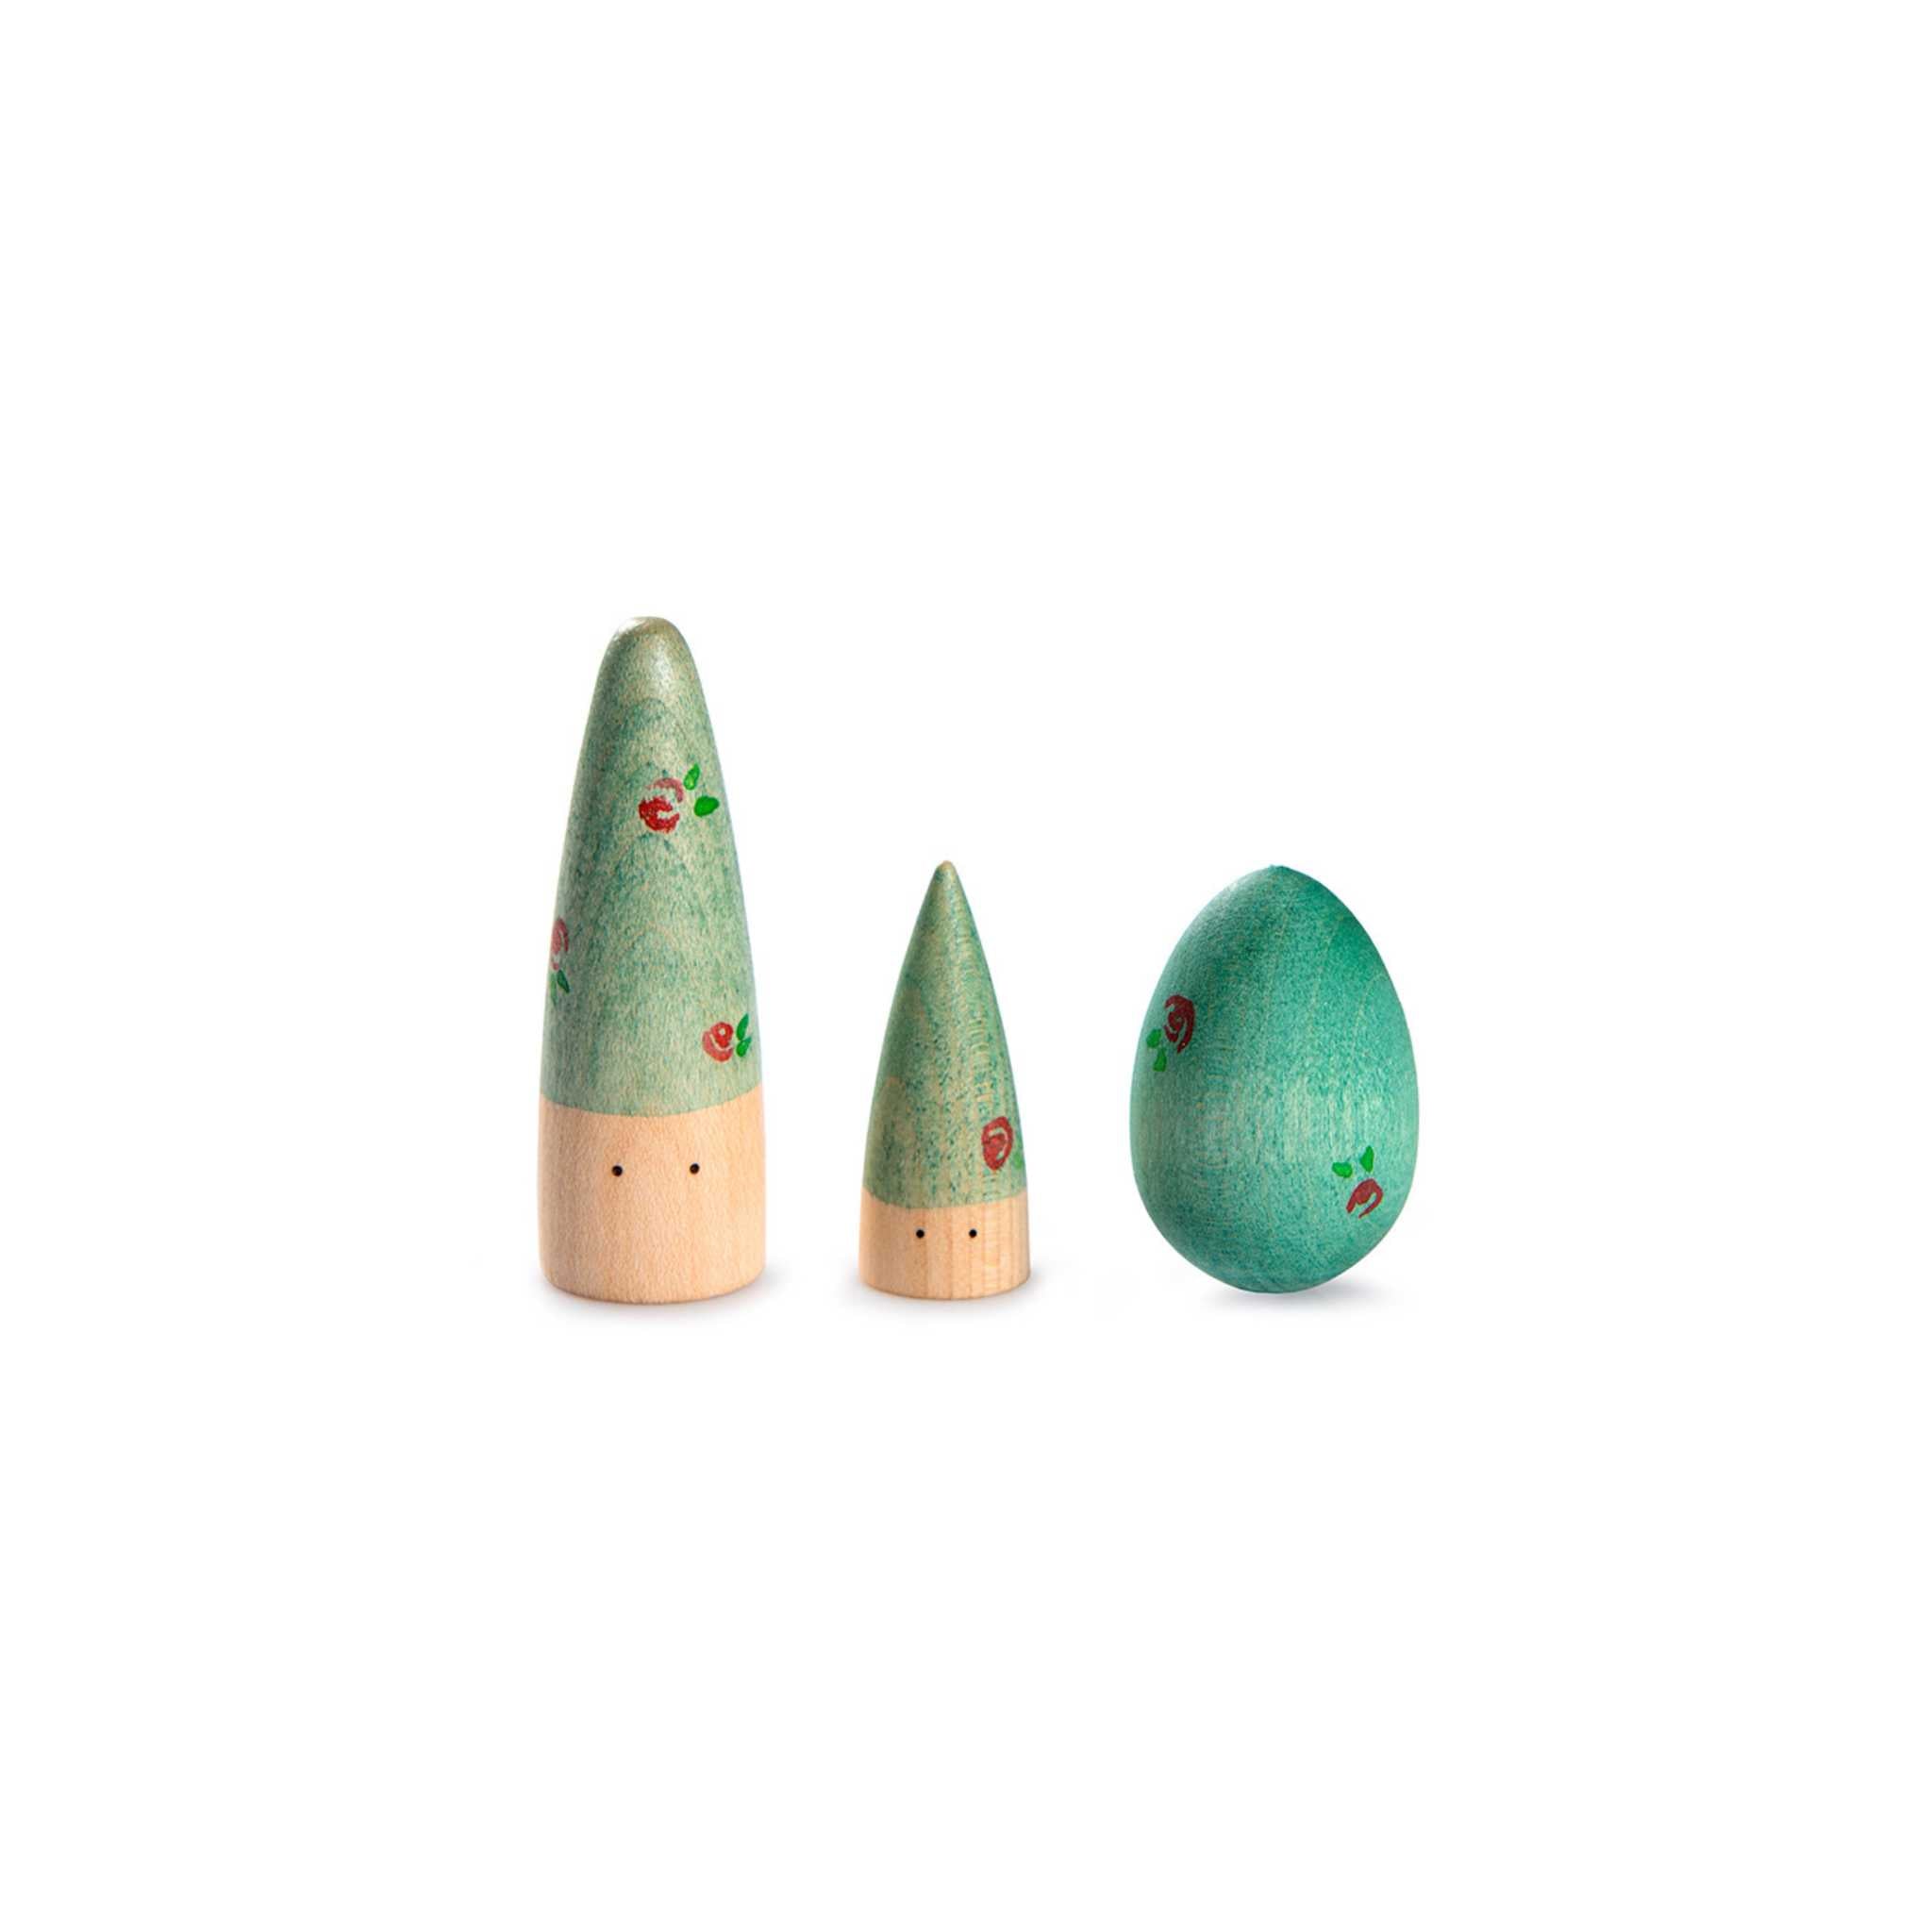 3 Green Wooden Toys From Grapat Lucky Lucky Collection on White Background